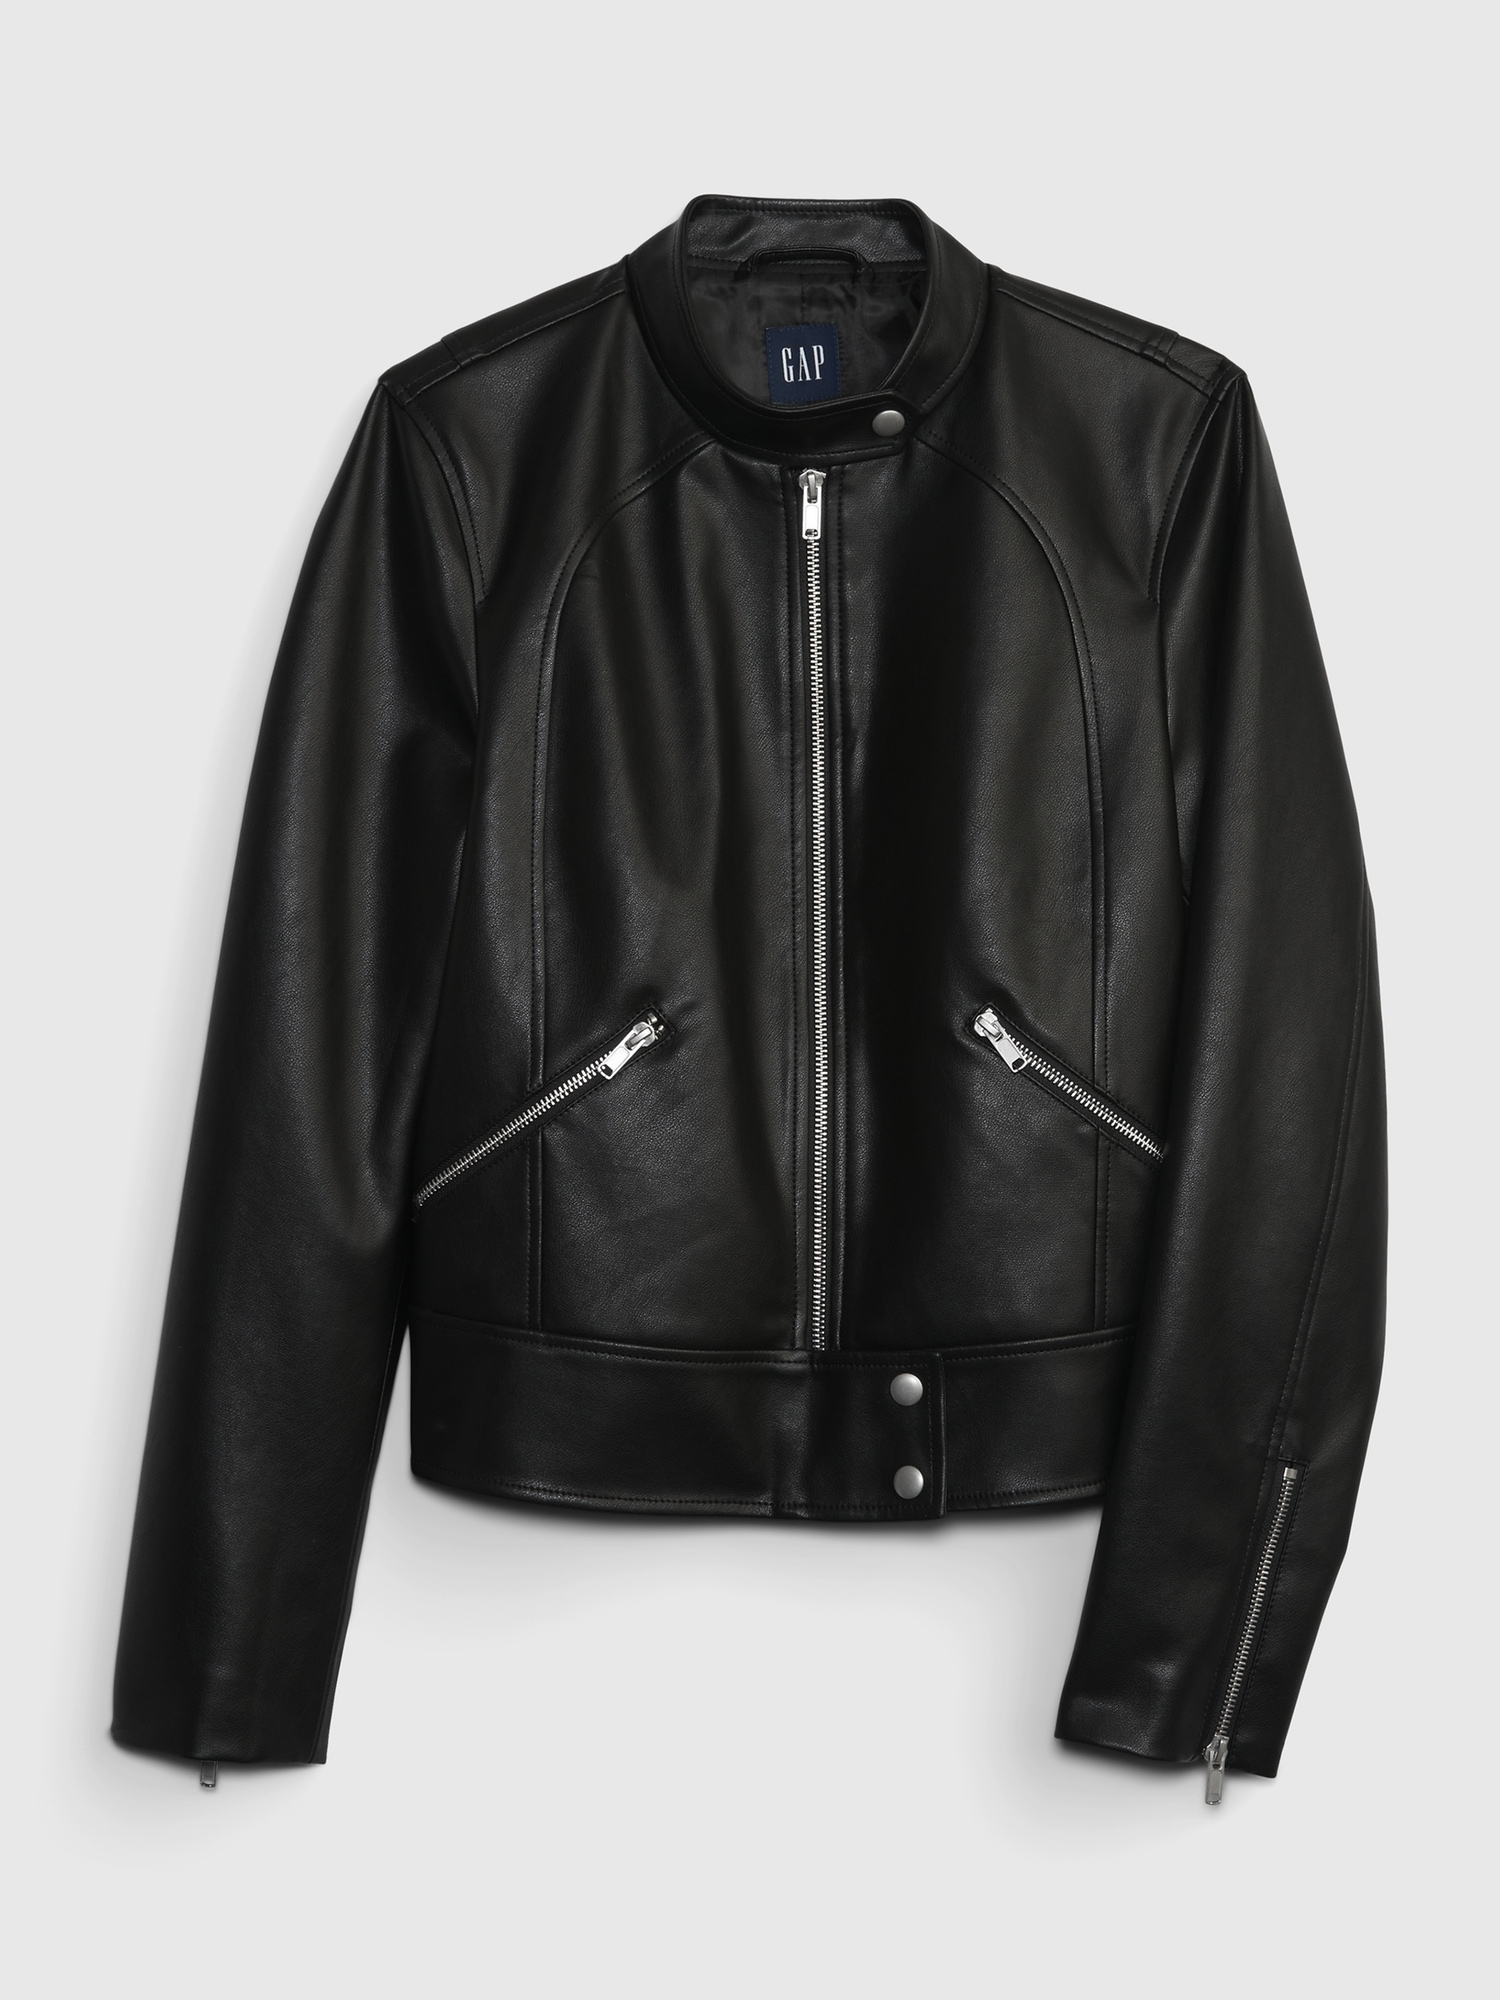 Off-White Leather-Trim Graphic Bomber Jacket